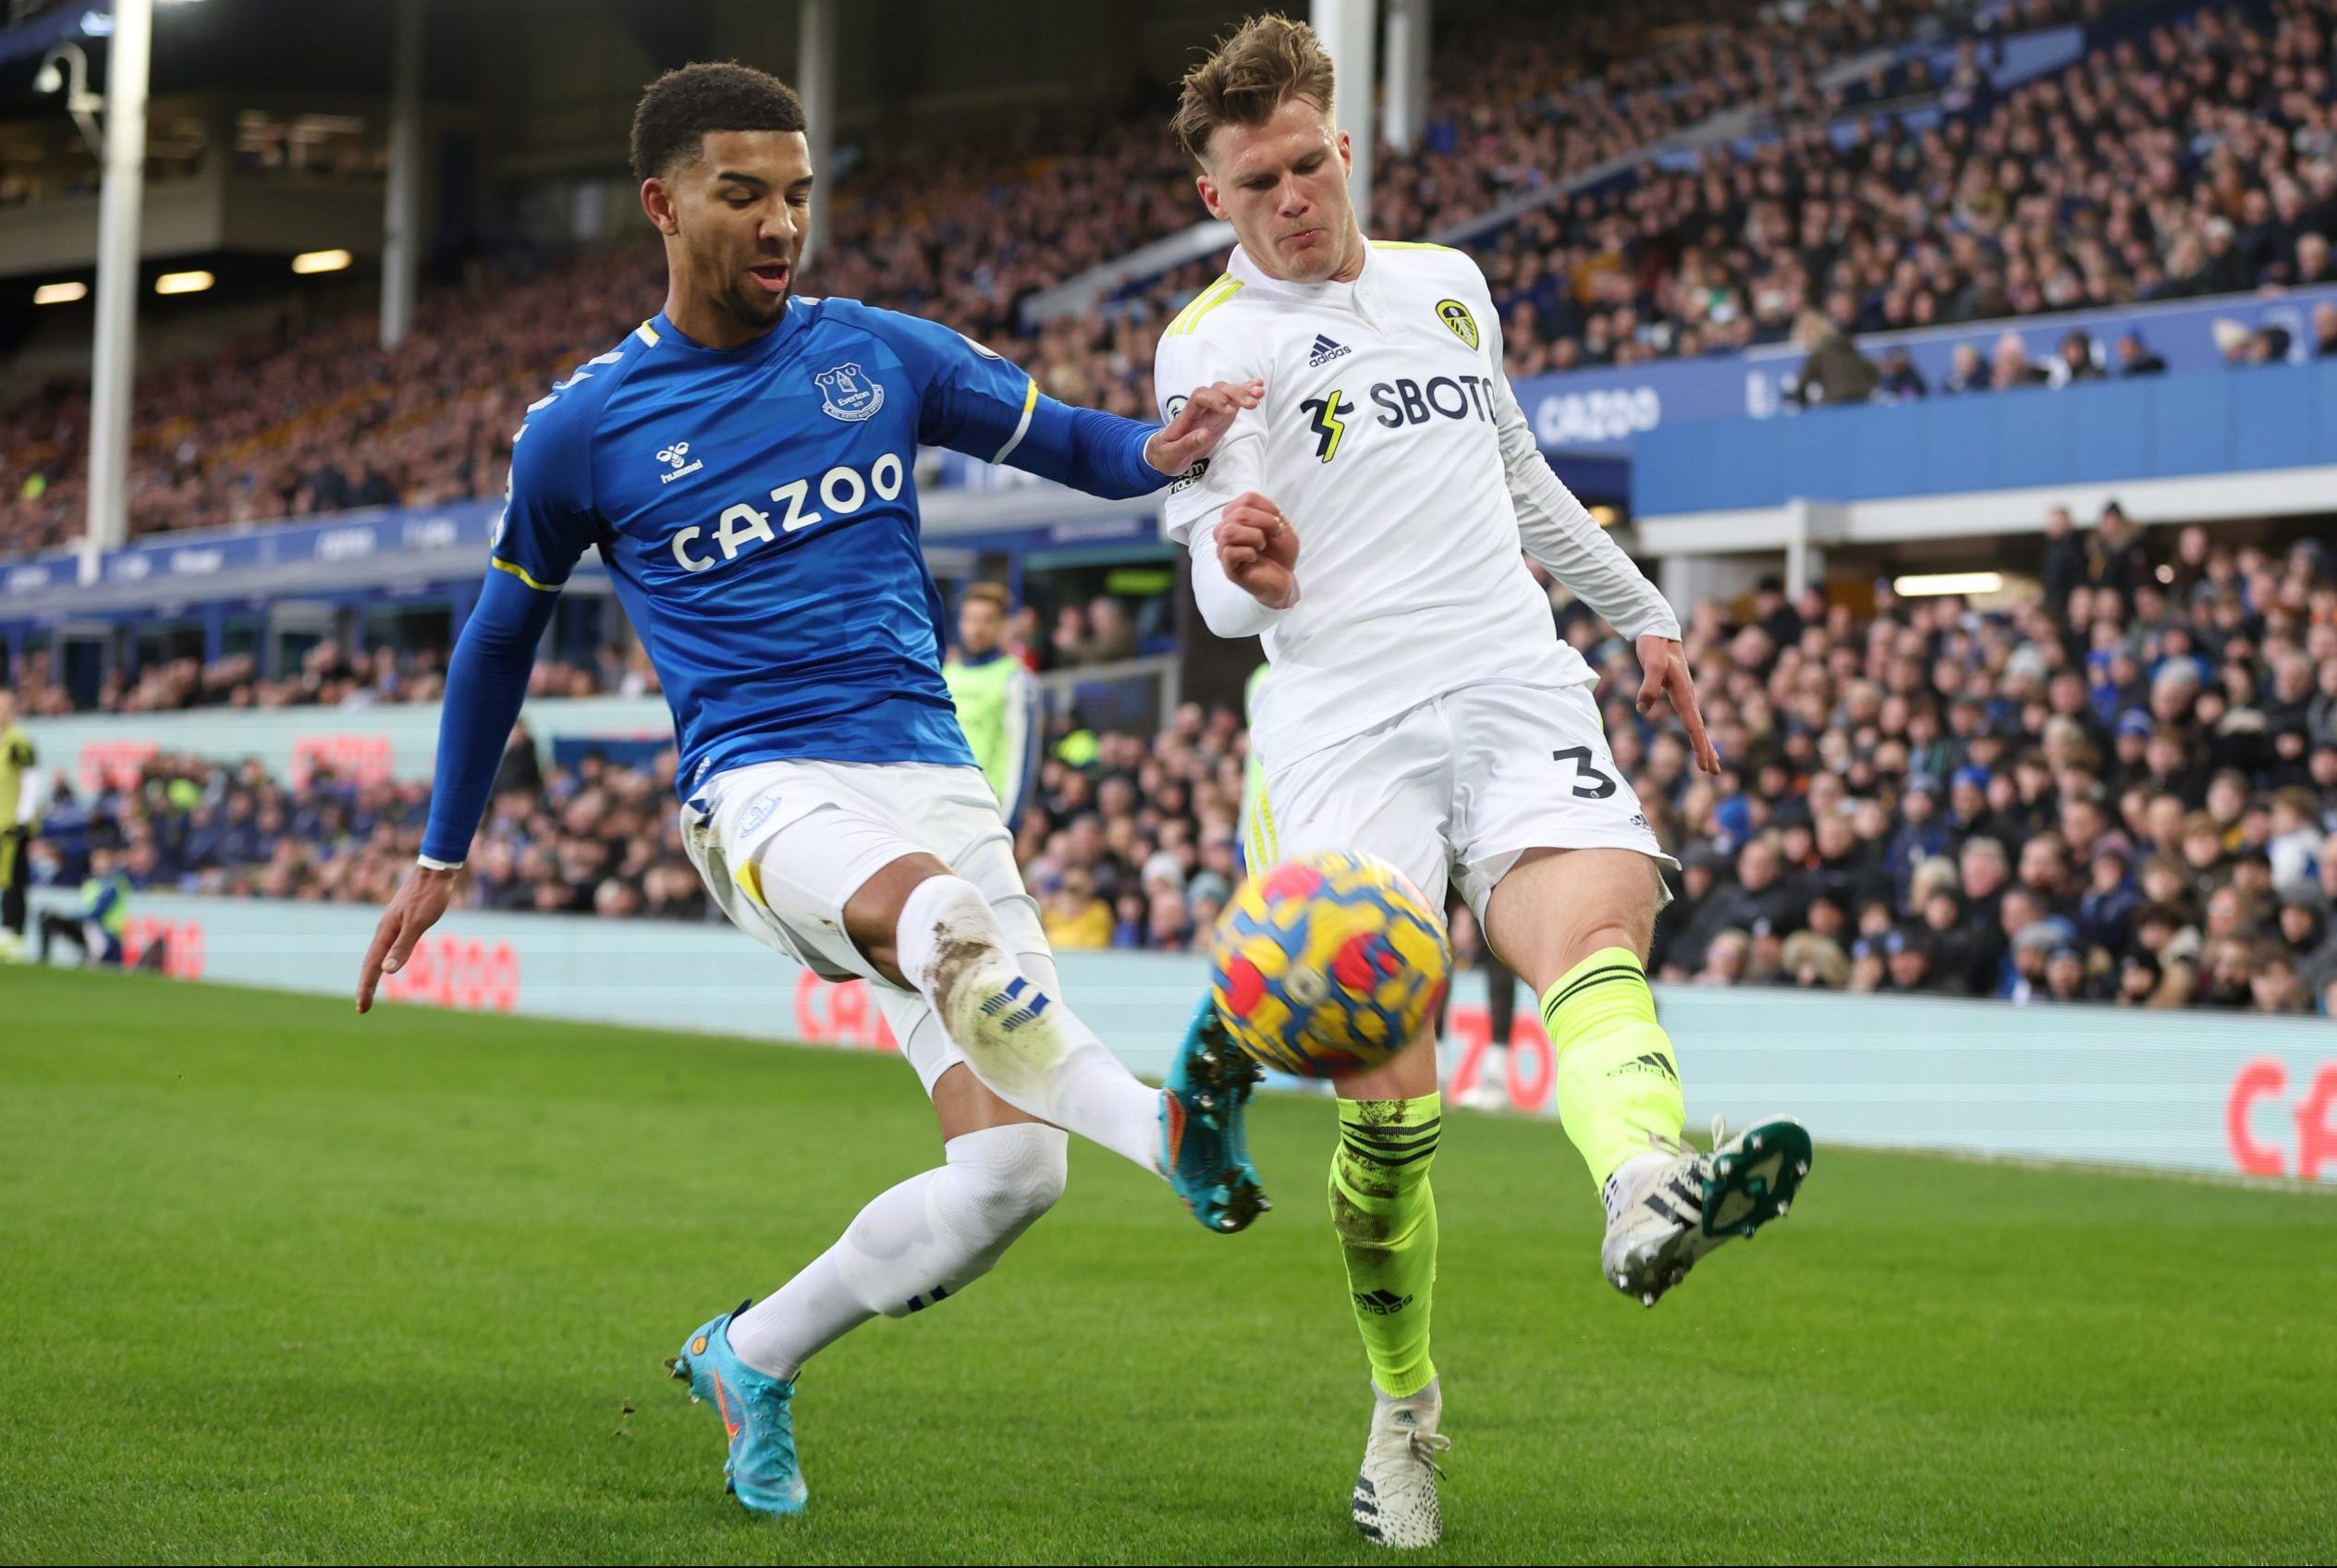 Soccer Football - Premier League - Everton v Leeds United - Goodison Park, Liverpool, Britain - February 12, 2022 Everton's Mason Holgate in action with Leeds United's Leo Fuhr Hjelde Action Images via Reuters/Carl Recine EDITORIAL USE ONLY. No use with unauthorized audio, video, data, fixture lists, club/league logos or 'live' services. Online in-match use limited to 75 images, no video emulation. No use in betting, games or single club /league/player publications.  Please contact your account 